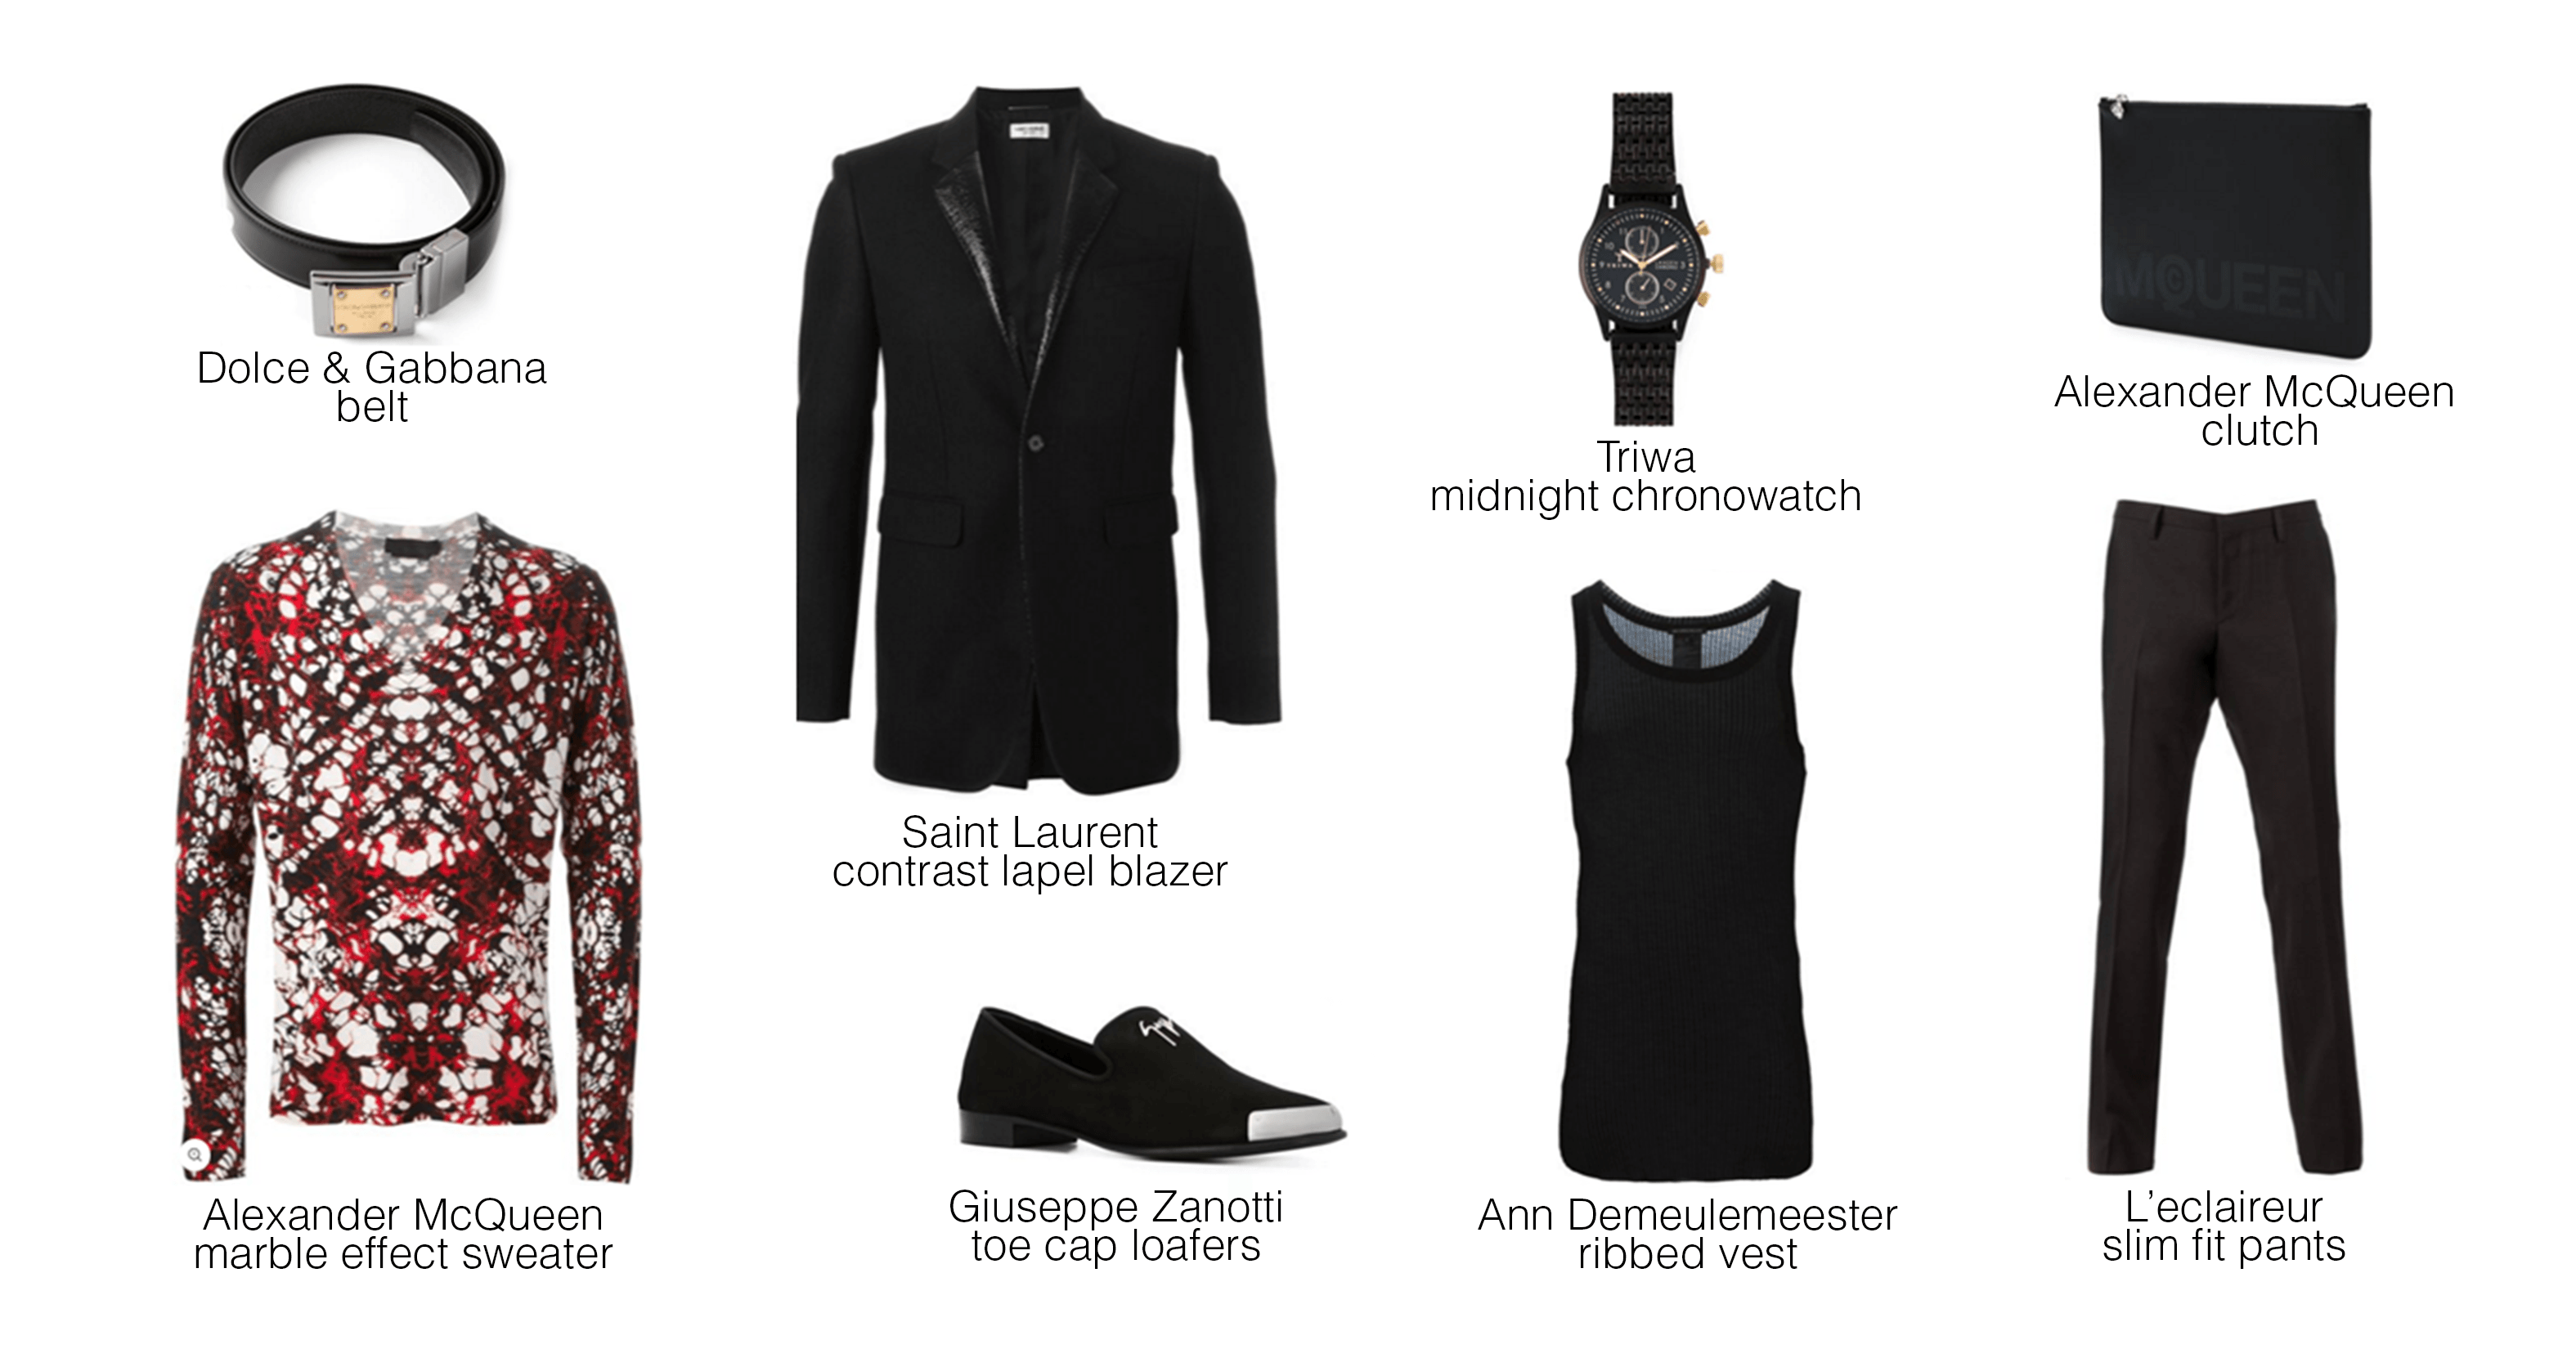 Last_Minute_New Years_Eve_Looks_for_Men_Modern_Dapper_Fashion_Style